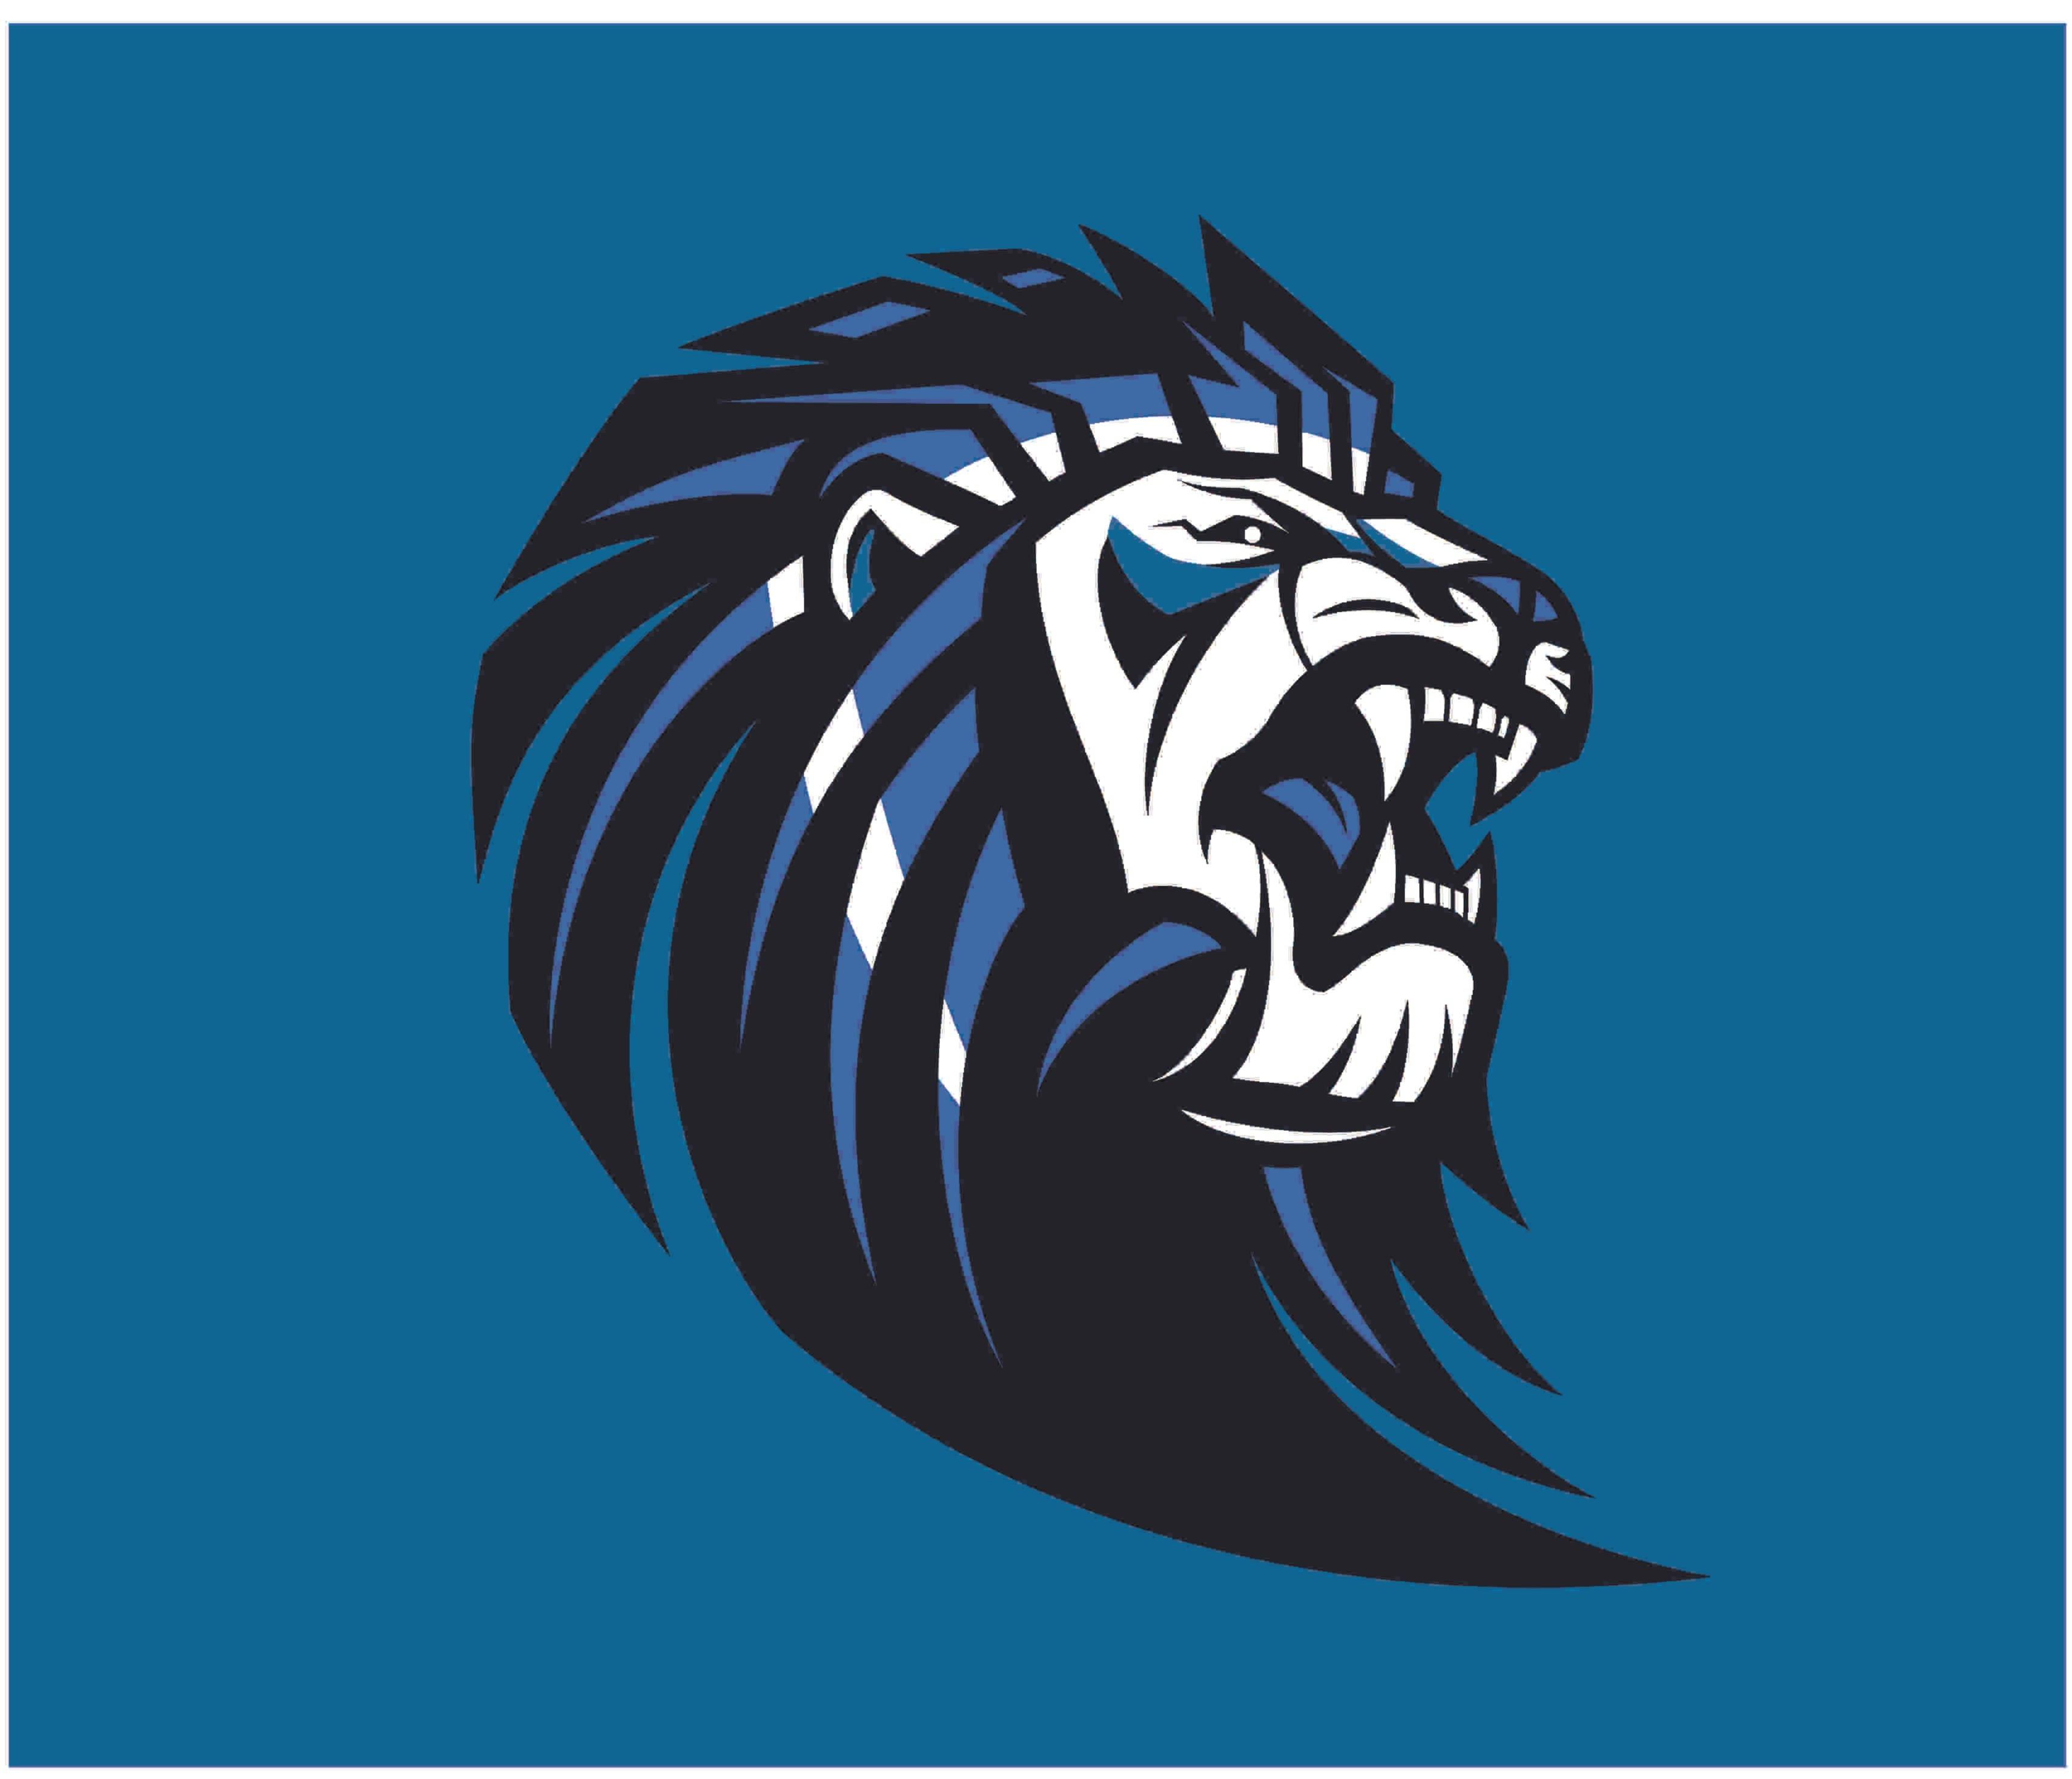 Different variations of the school's logo. Blue background with black and white lion.